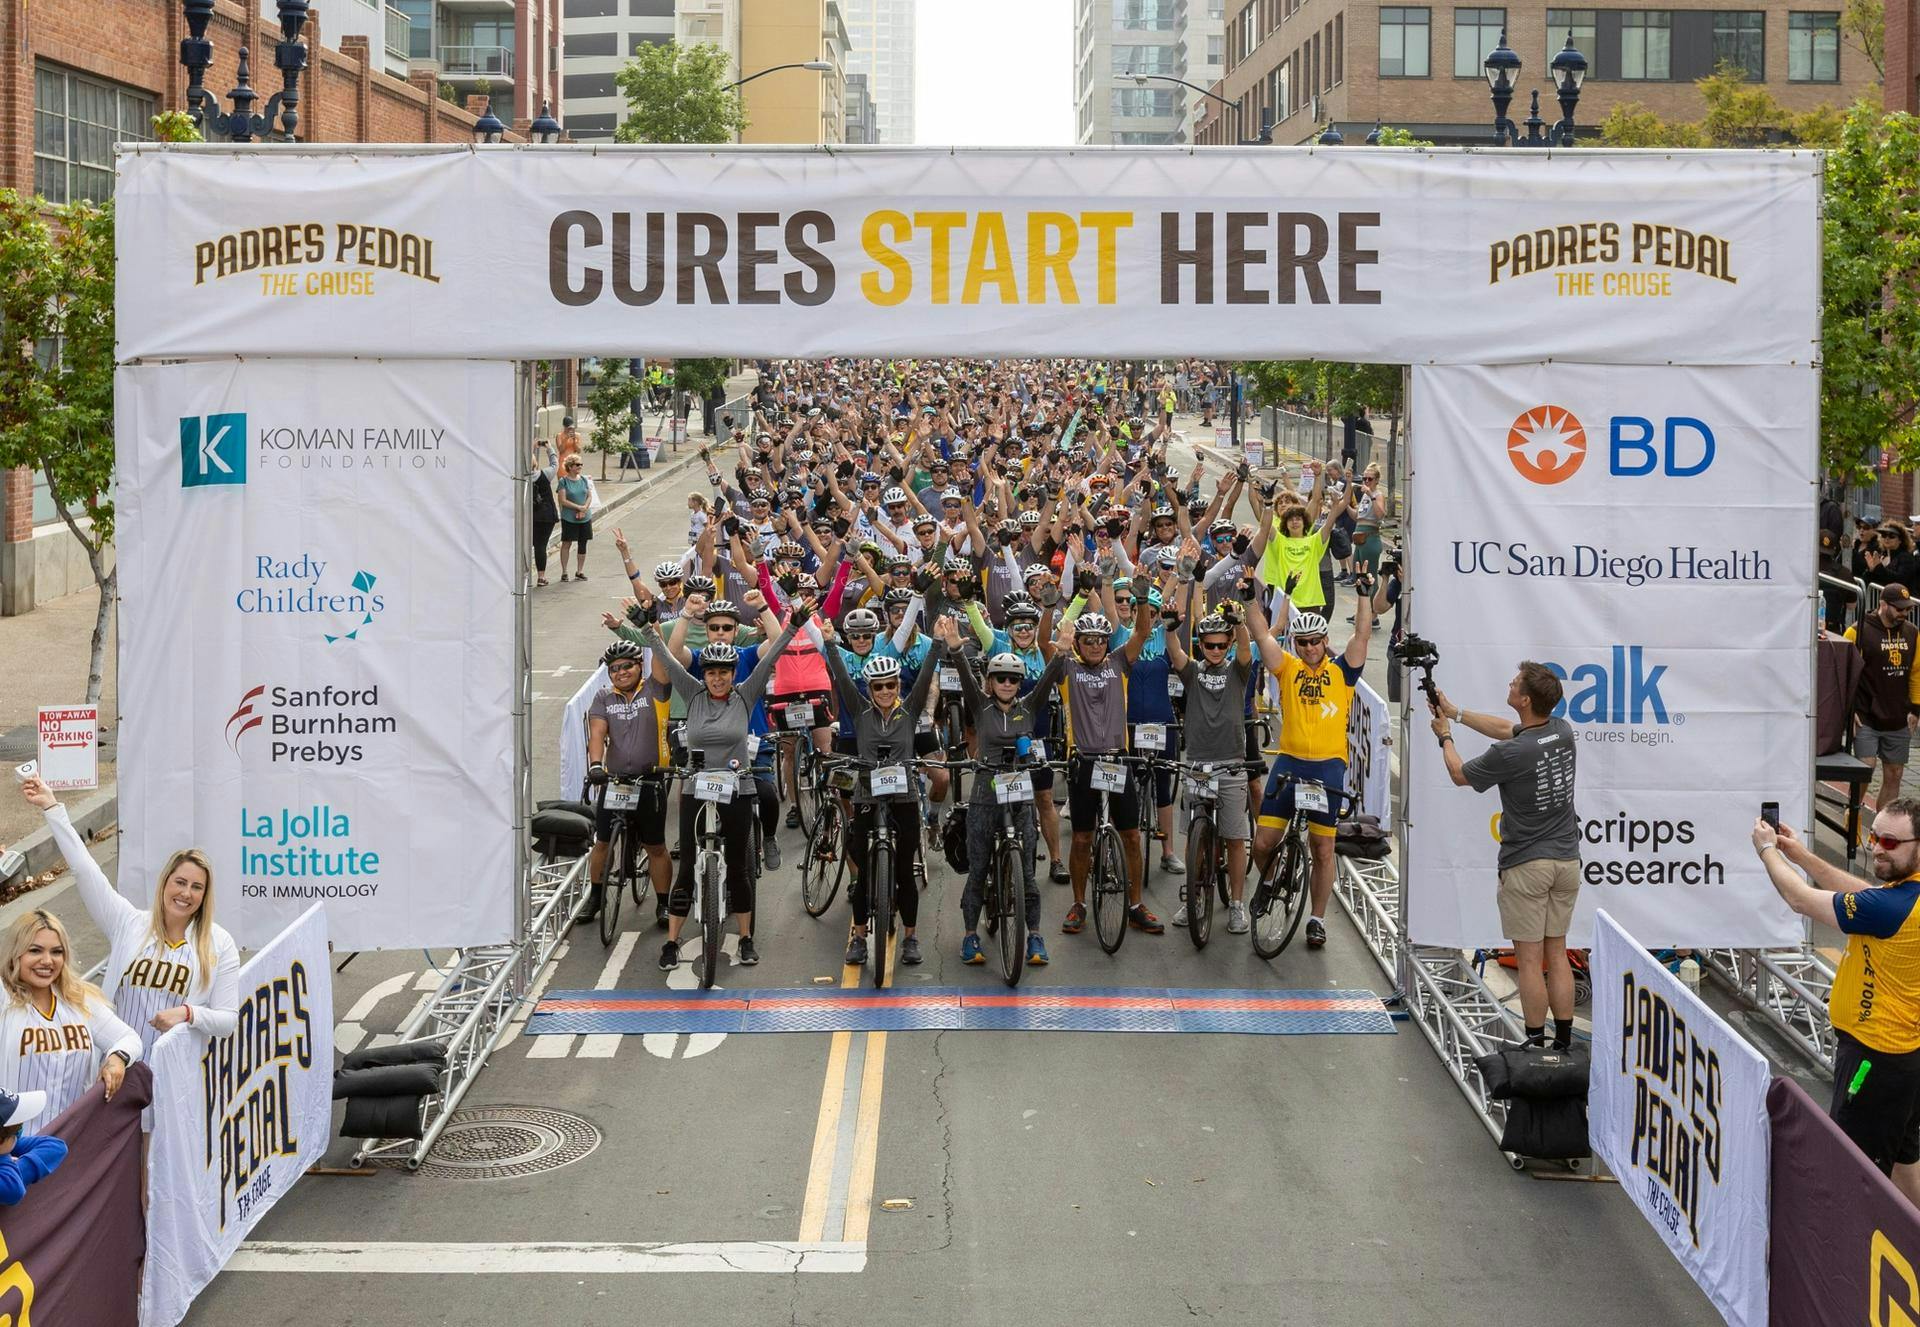 Padres Pedal the Cause brings funding and hope for cancer research in San Diego undefined